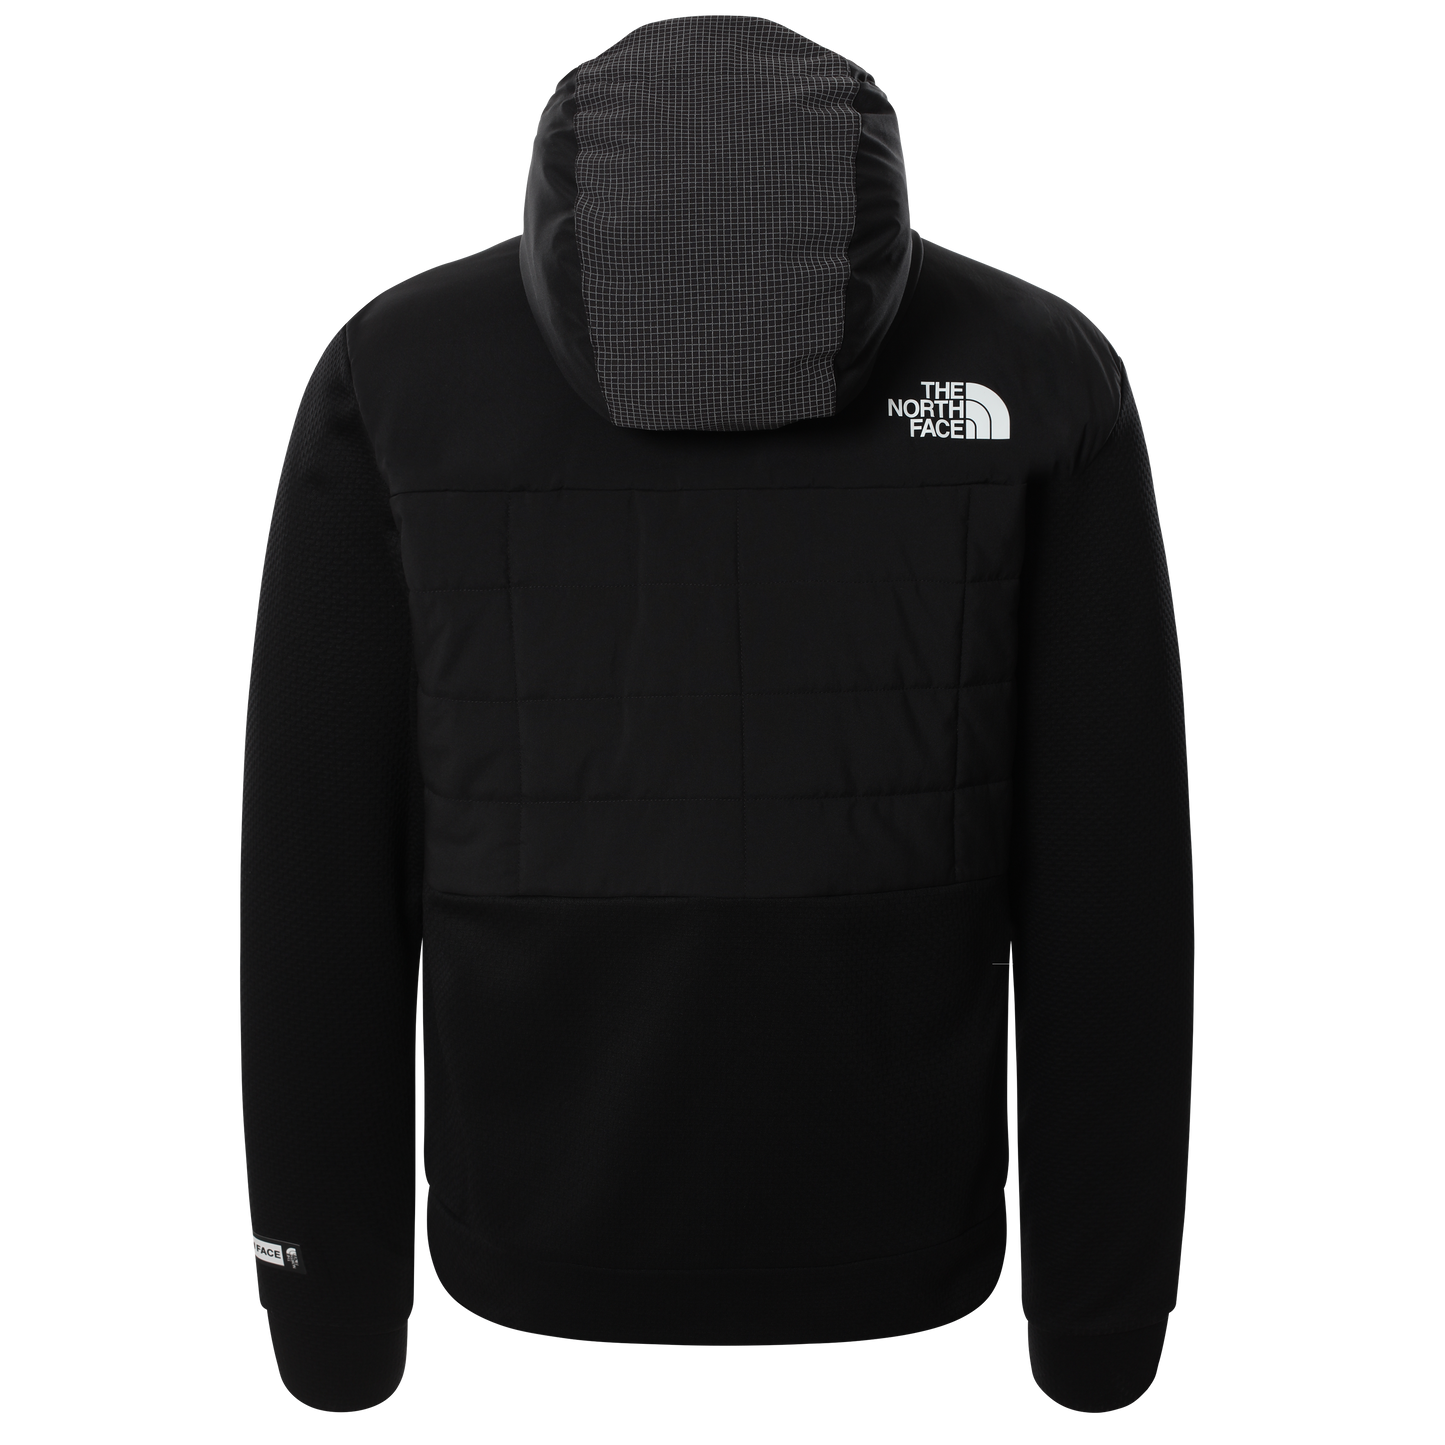 The North Face MA Insulated Jacket